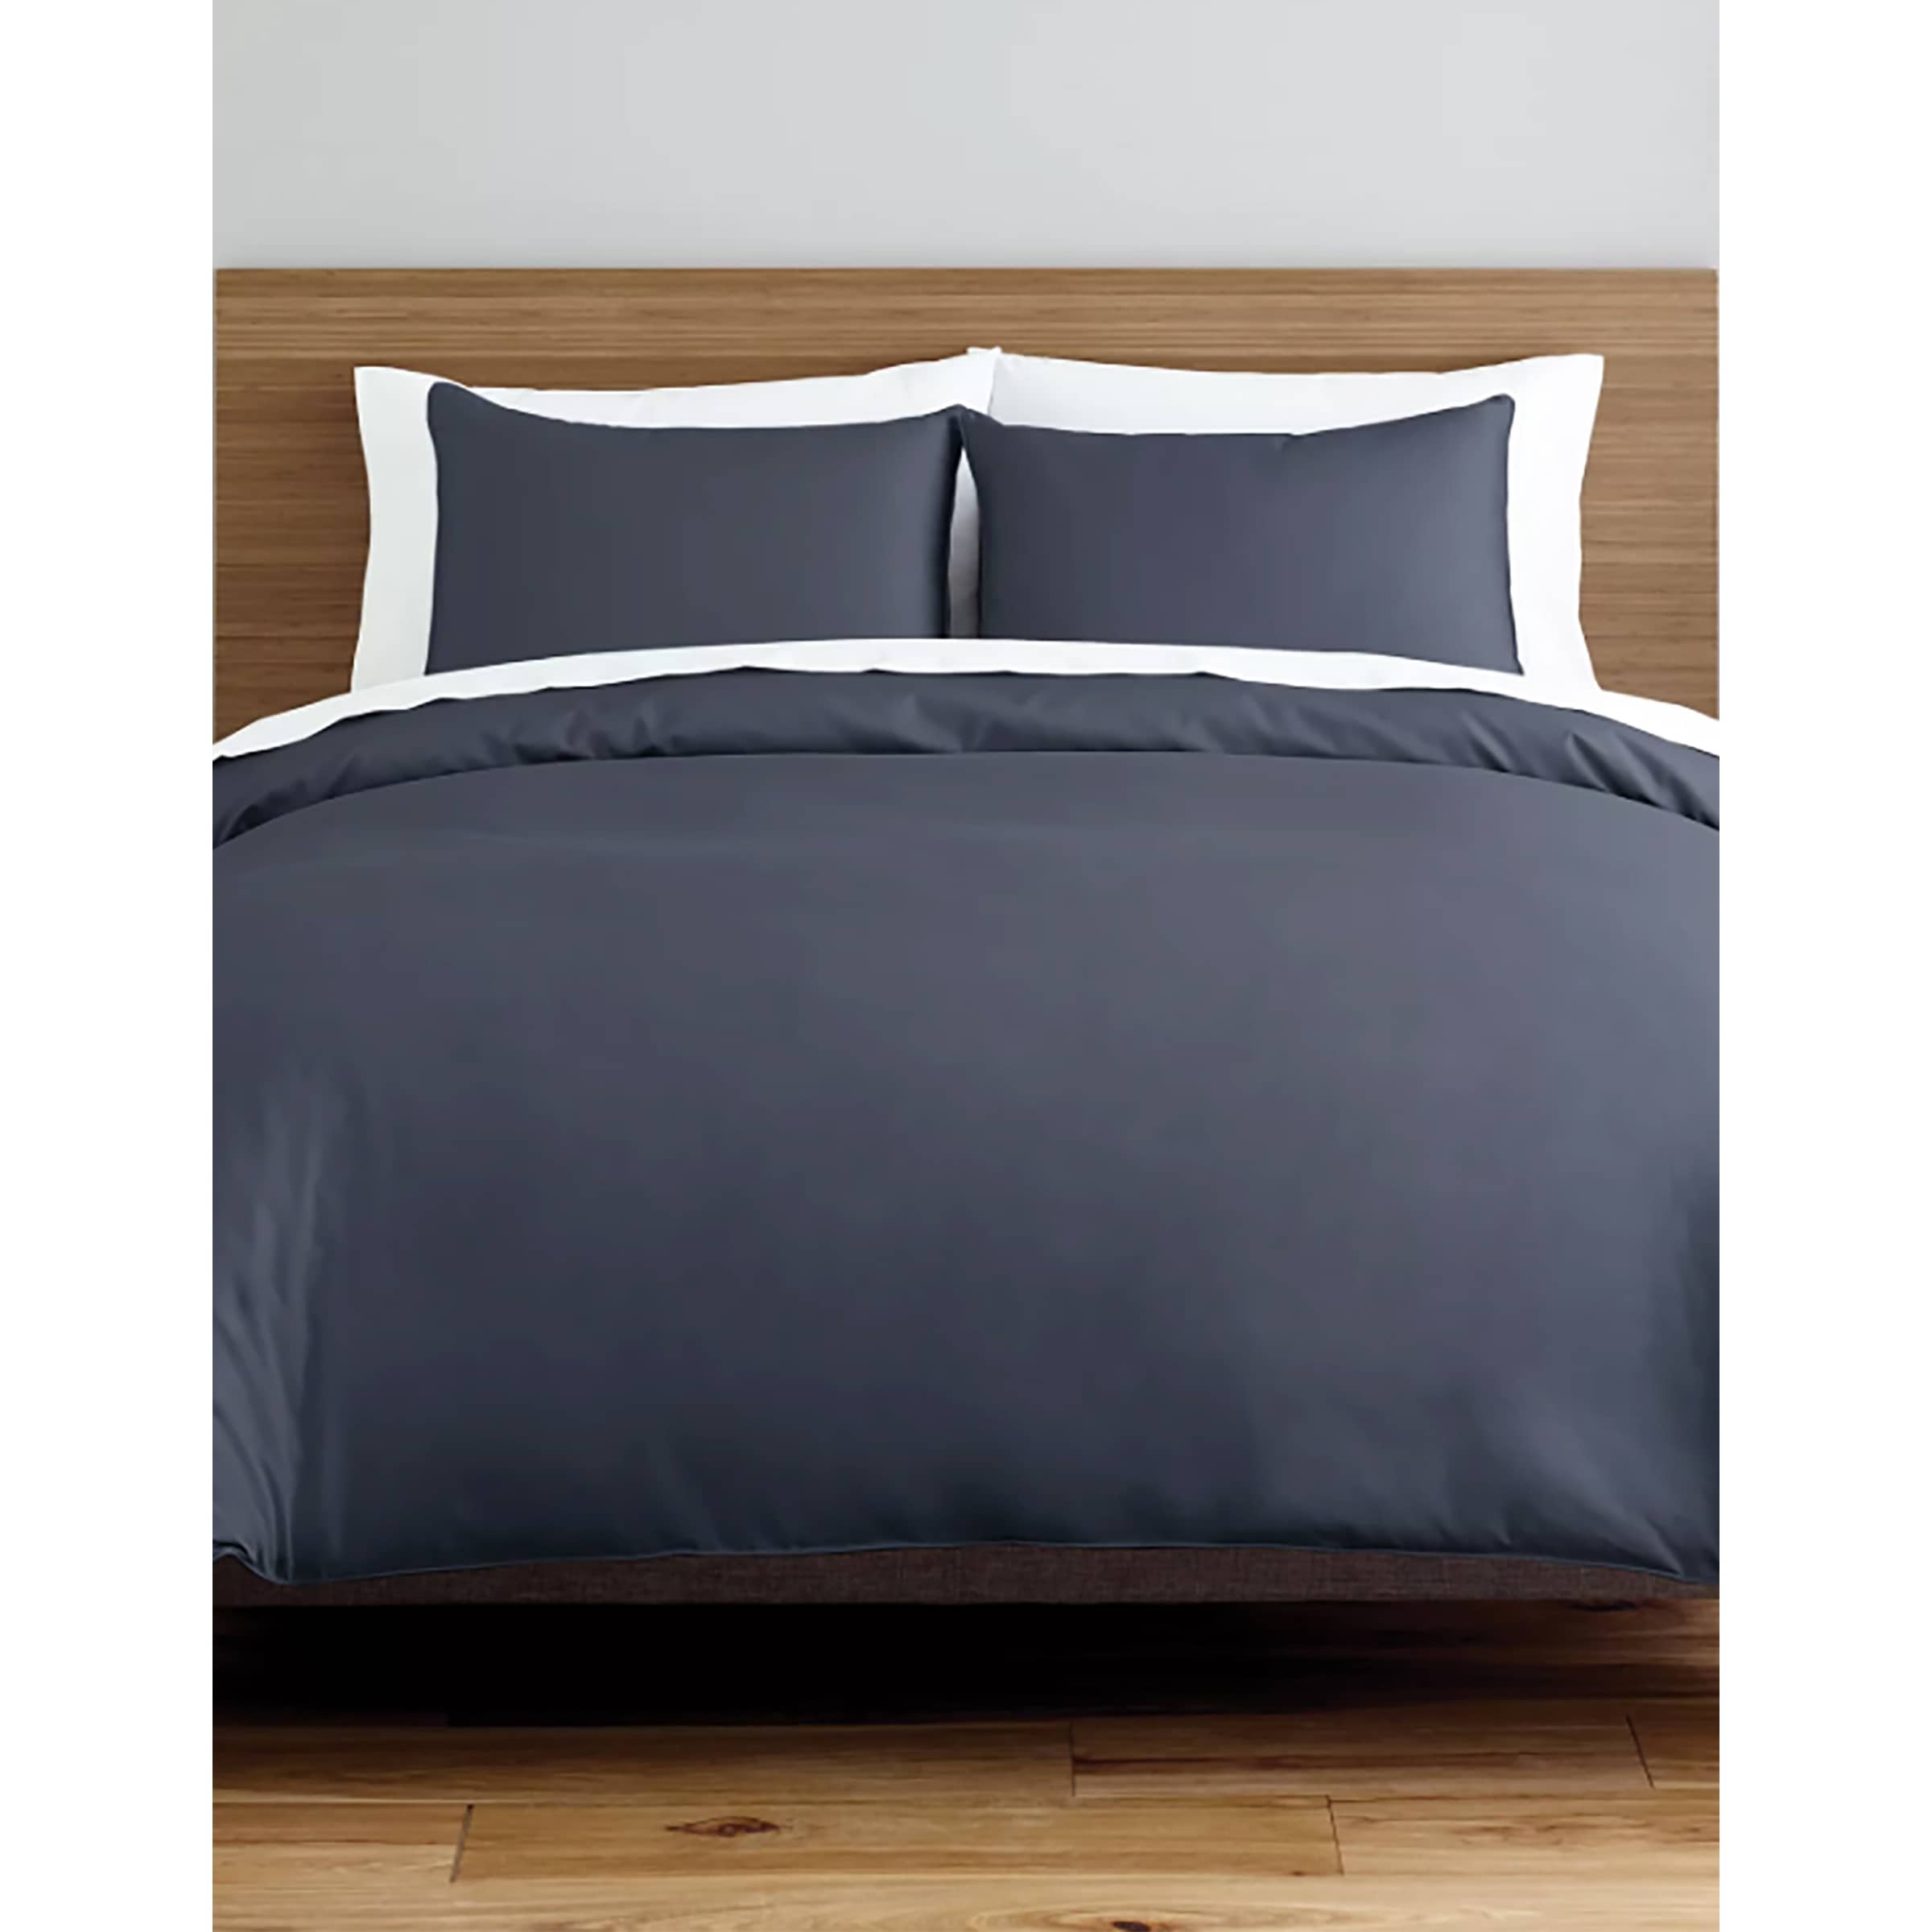 https://ak1.ostkcdn.com/images/products/is/images/direct/f1e3f85709df804b02d75e95bc3238dd4c49e2f5/Nestwell-450TC-Duvet-Set.jpg